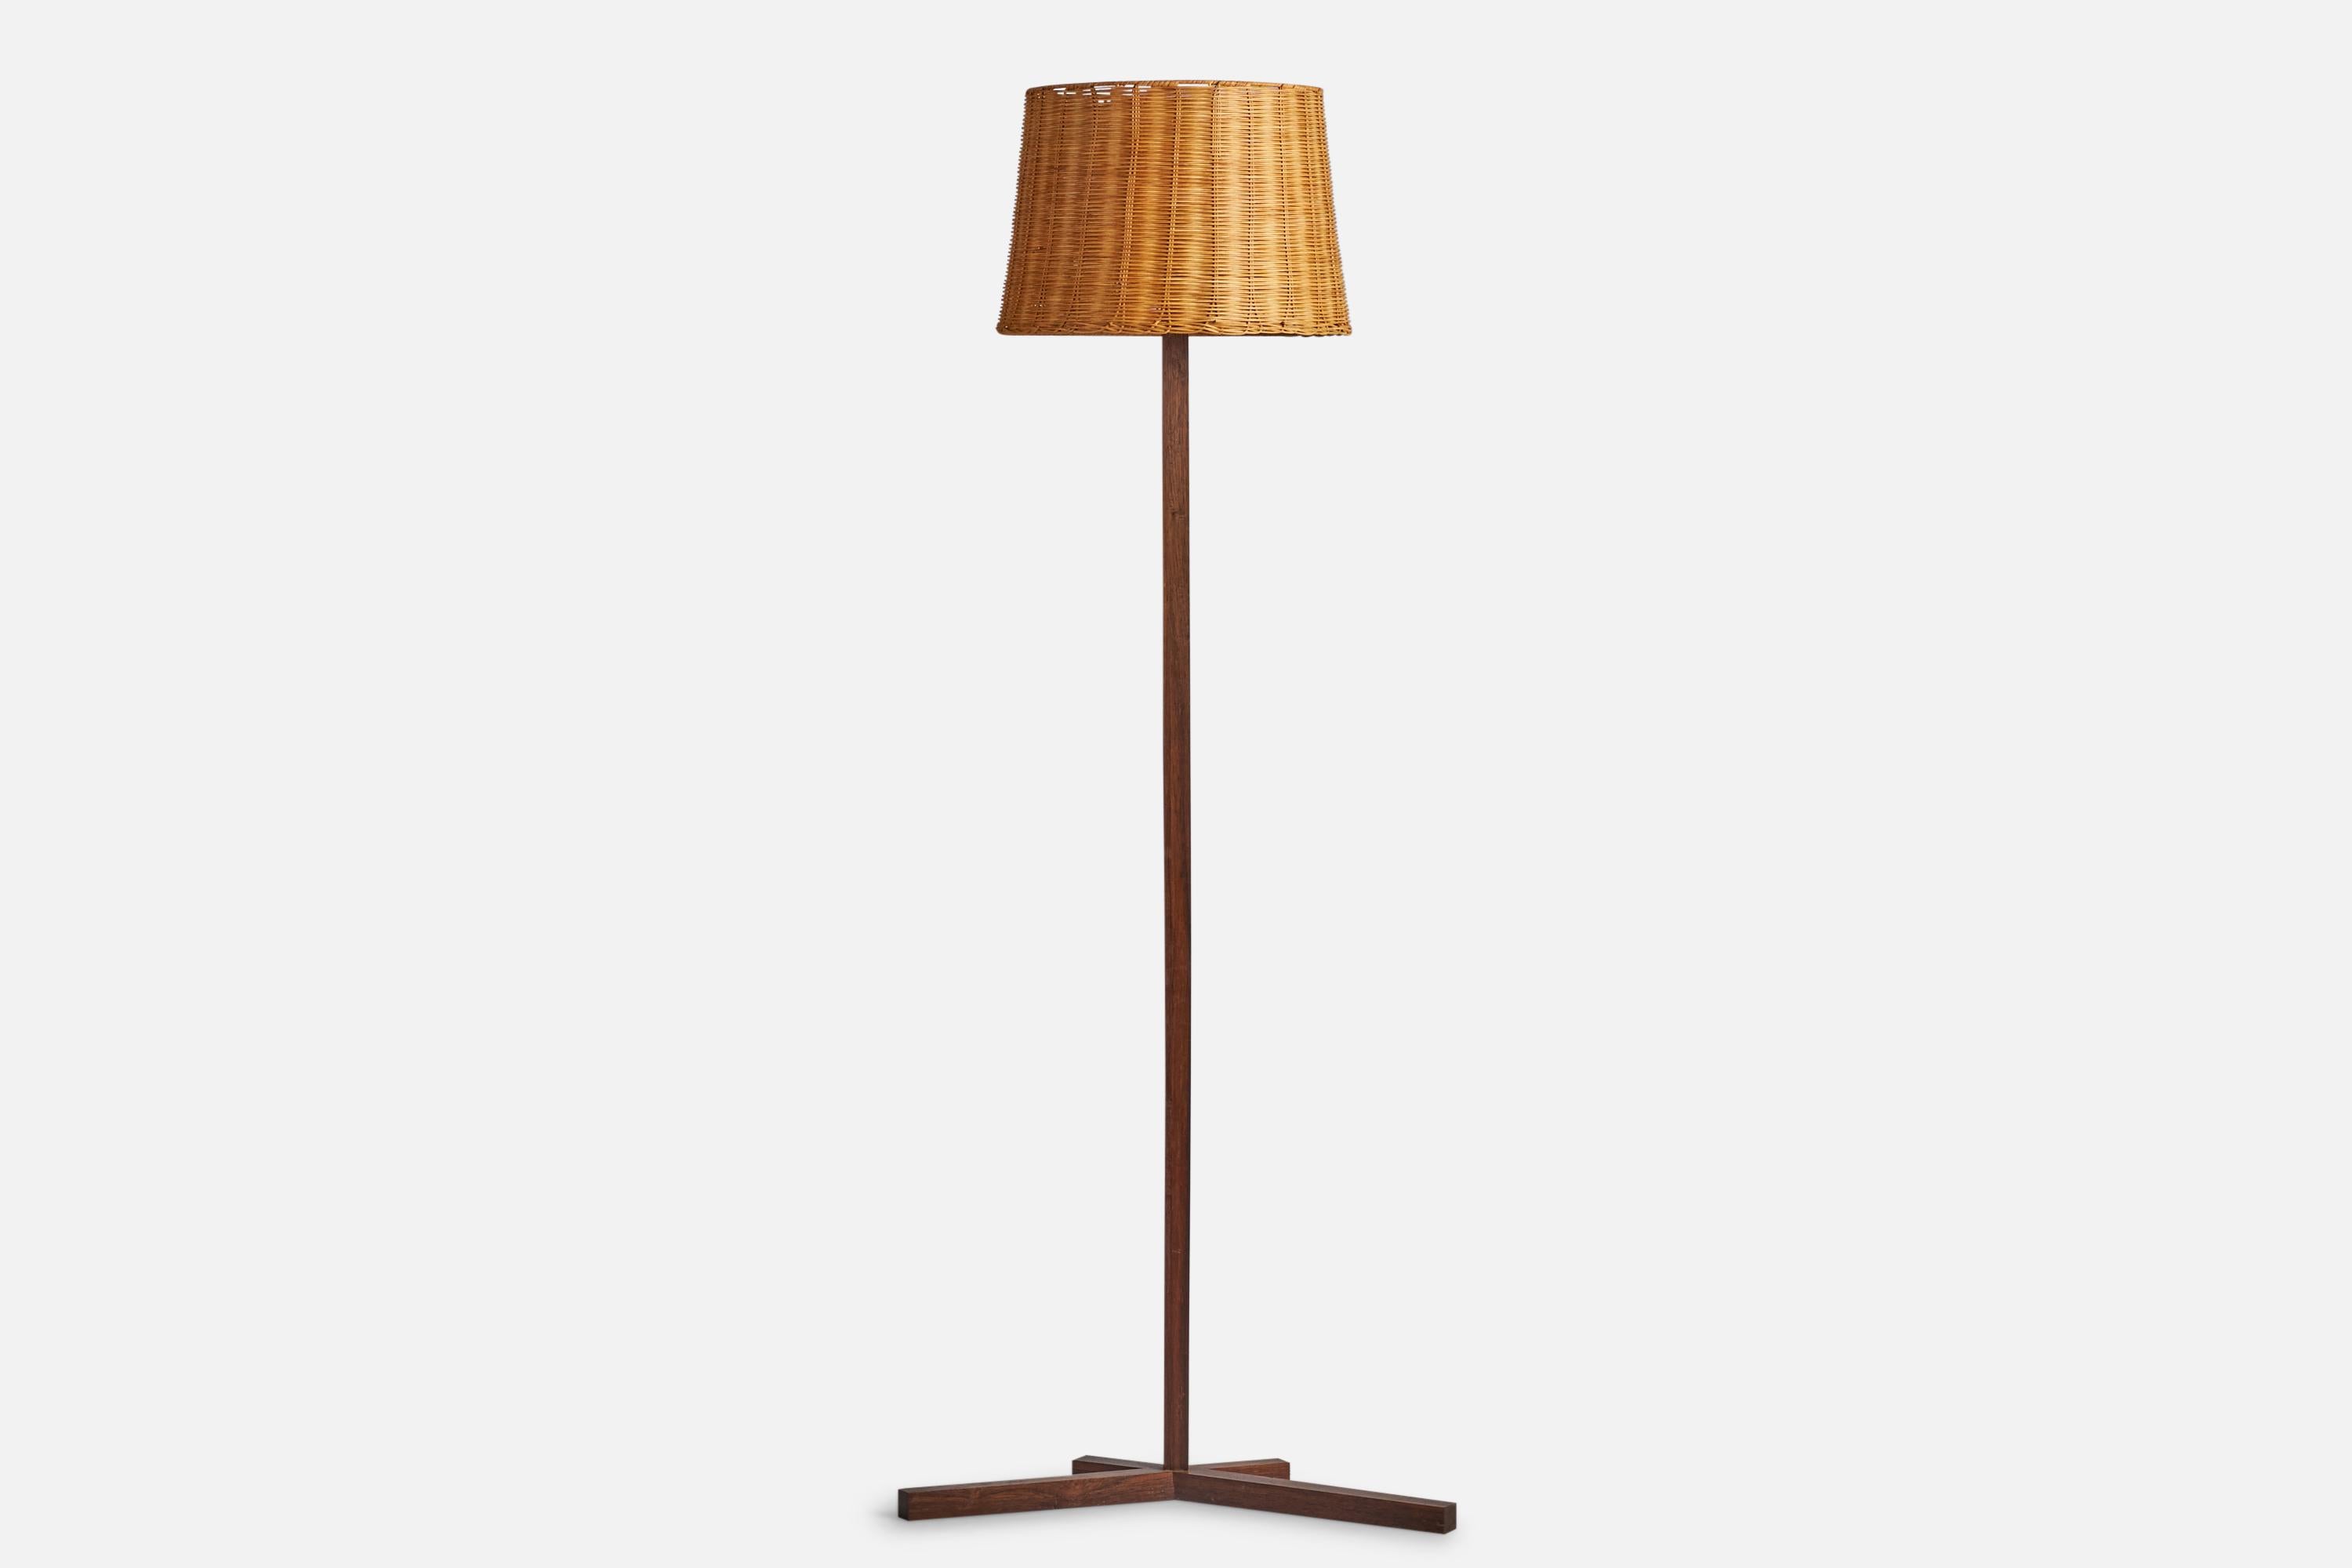 A rosewood and rattan floor lamp designed and produced in Denmark, c. 1950s.

Overall Dimensions (inches): 66” H x 25.75” W x 17” D
Bulb Specifications: E-26 Bulb
Number of Sockets: 1
All lighting will be converted for US usage. We are unable to